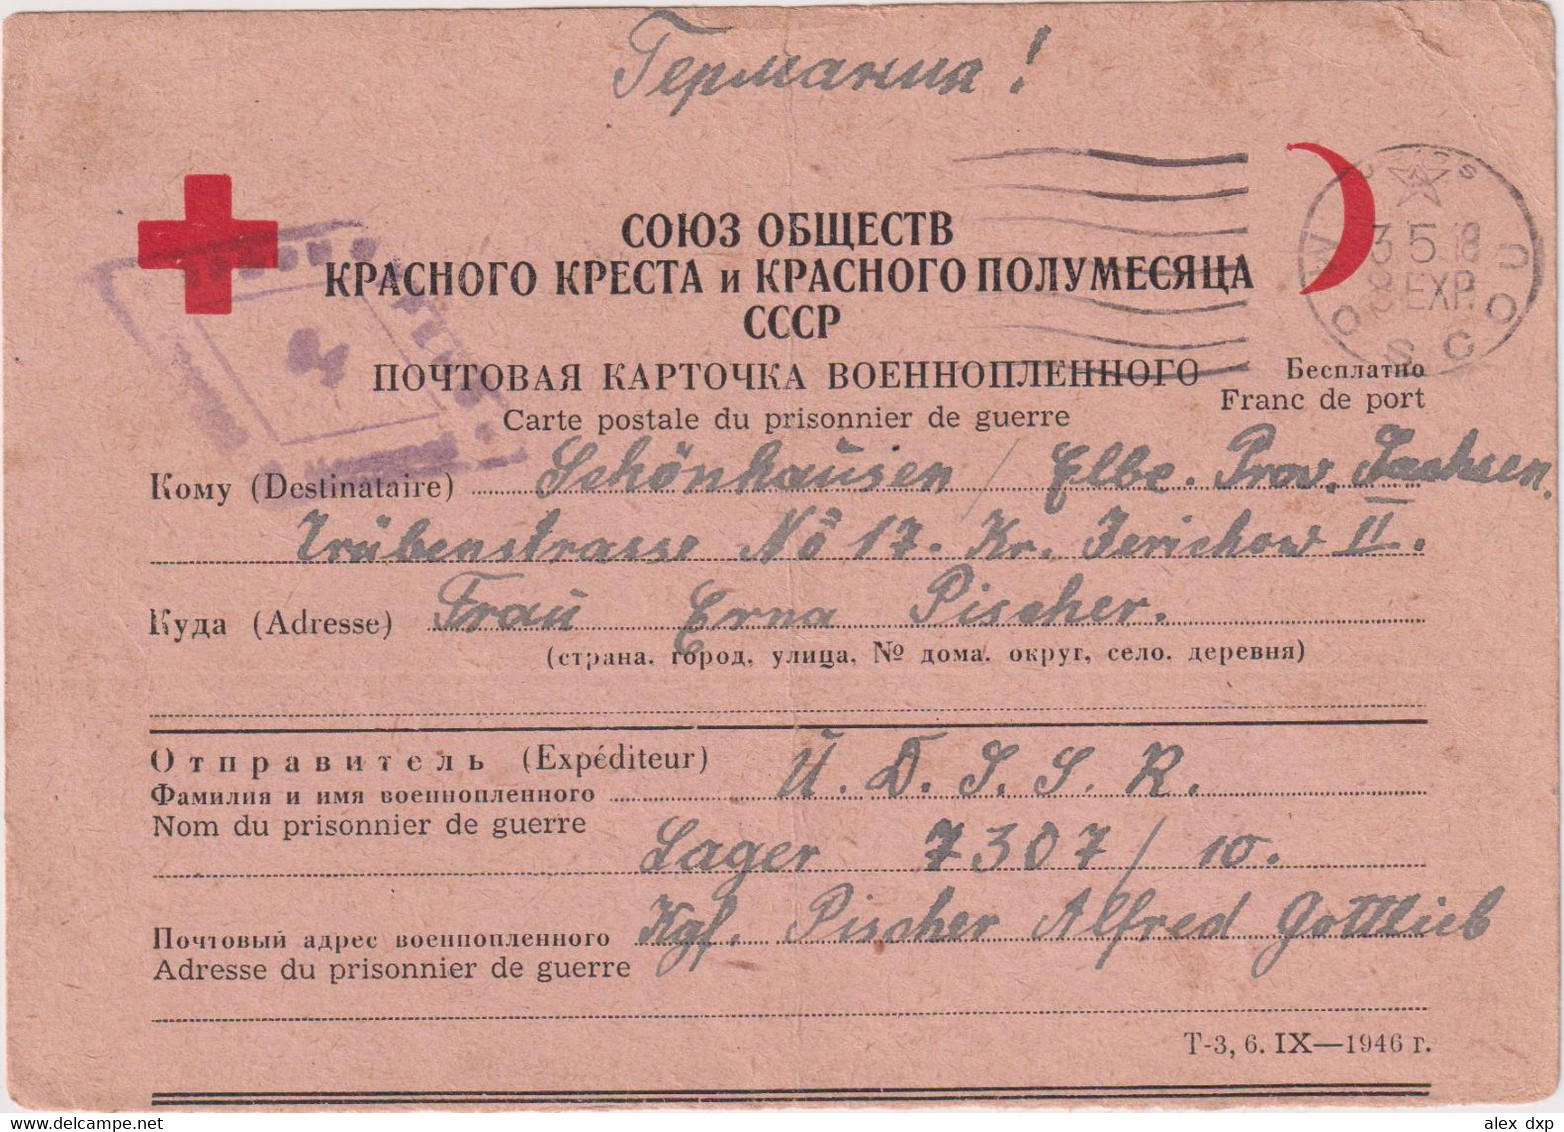 RUSSIA (USSR) > 1948 POSTAL HISTORY > POW RED CROSS CARD FROM POW CAMP 7307/10 TO SCHOHAUSEN, GERMANY - Storia Postale